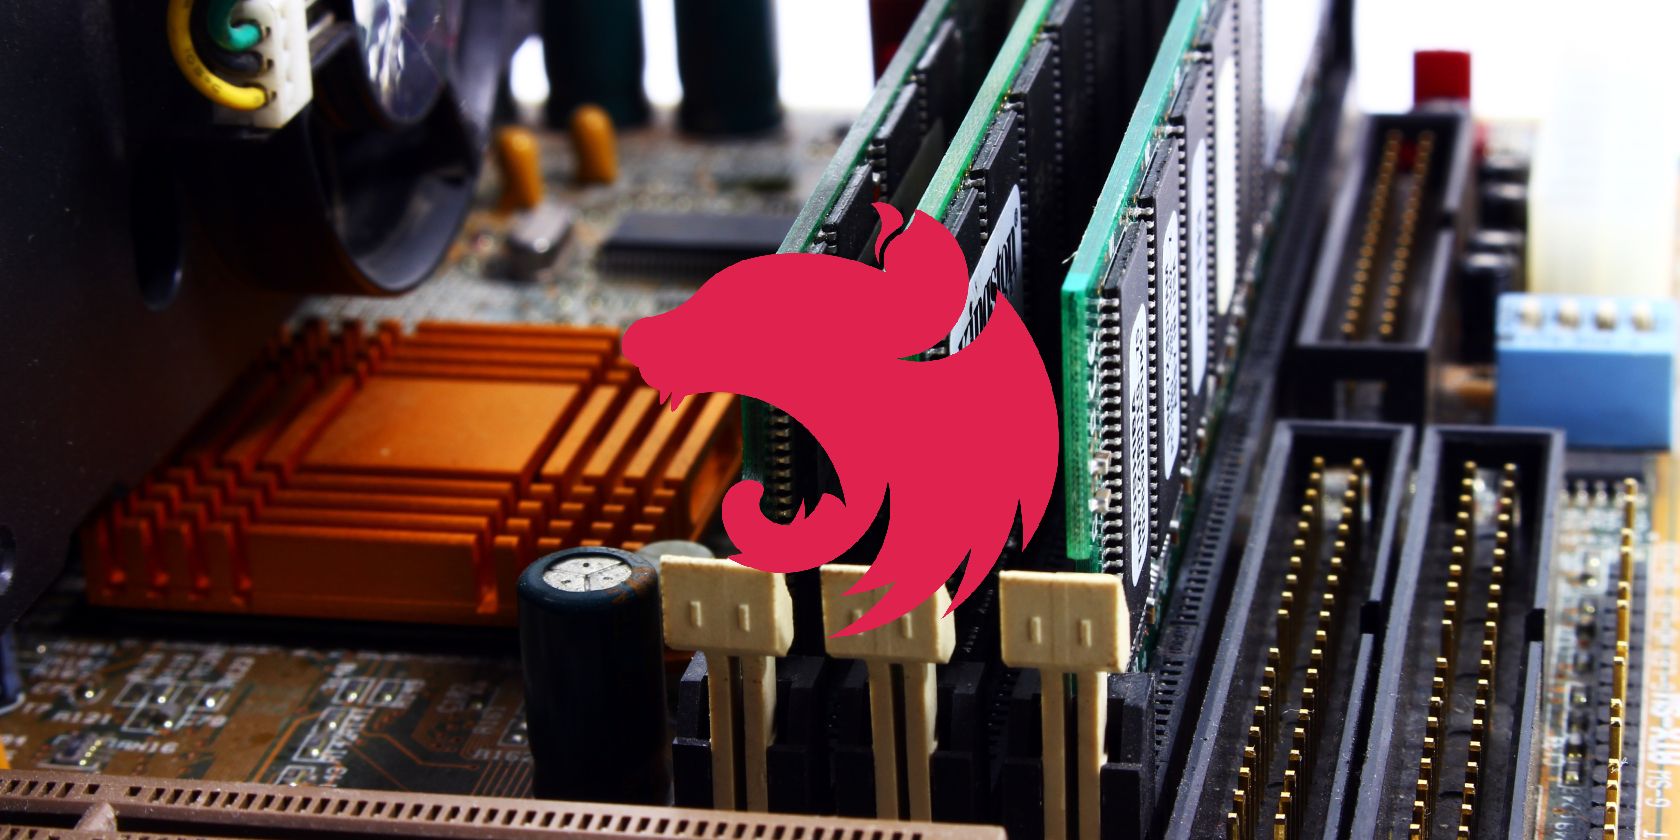 The Nest.js logo, a red silhouette of a cat's head, superimposed on a PC motherboard